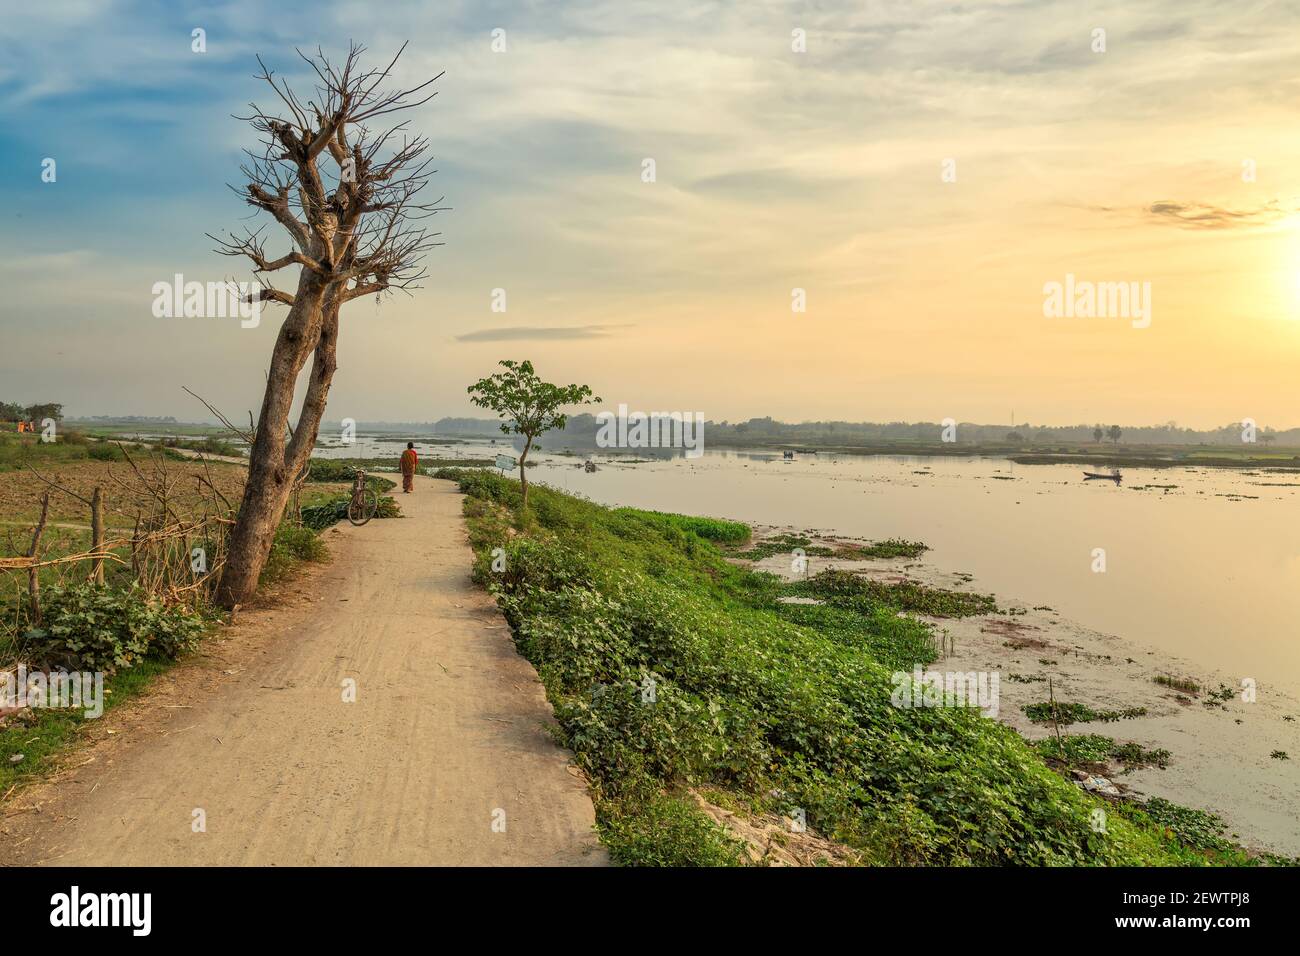 Rural India Landscape With Unpaved Village Road And River Bank At